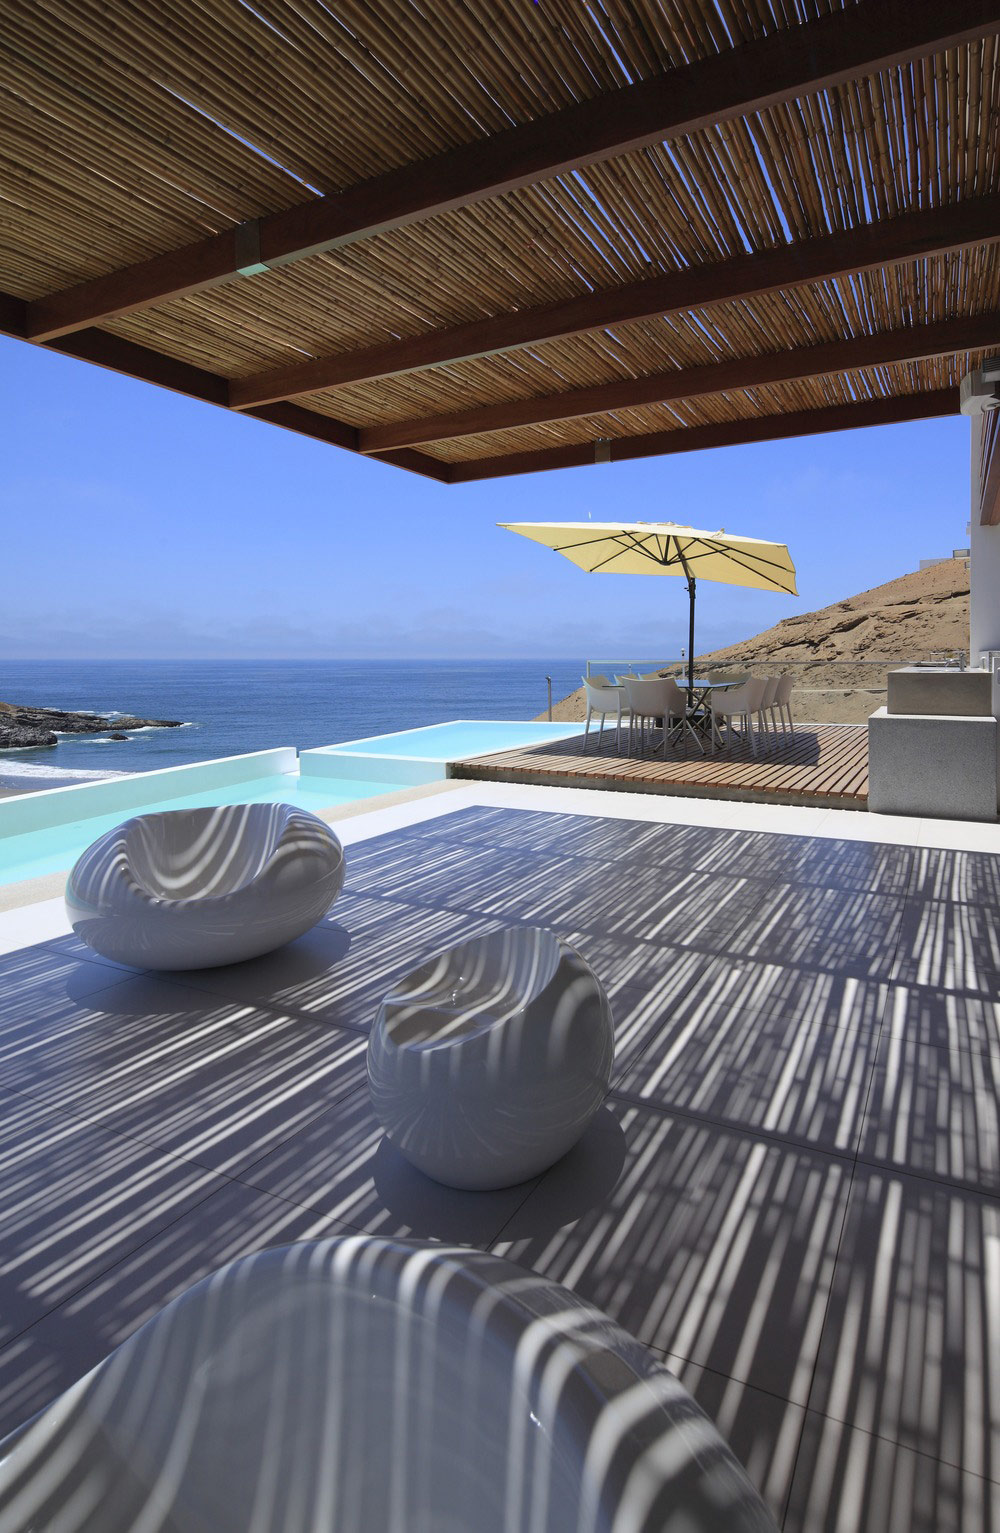 Modern Outdoor Furniture, Terrace, Water Views, Stunning Home situated above Palillos Beach, Peru